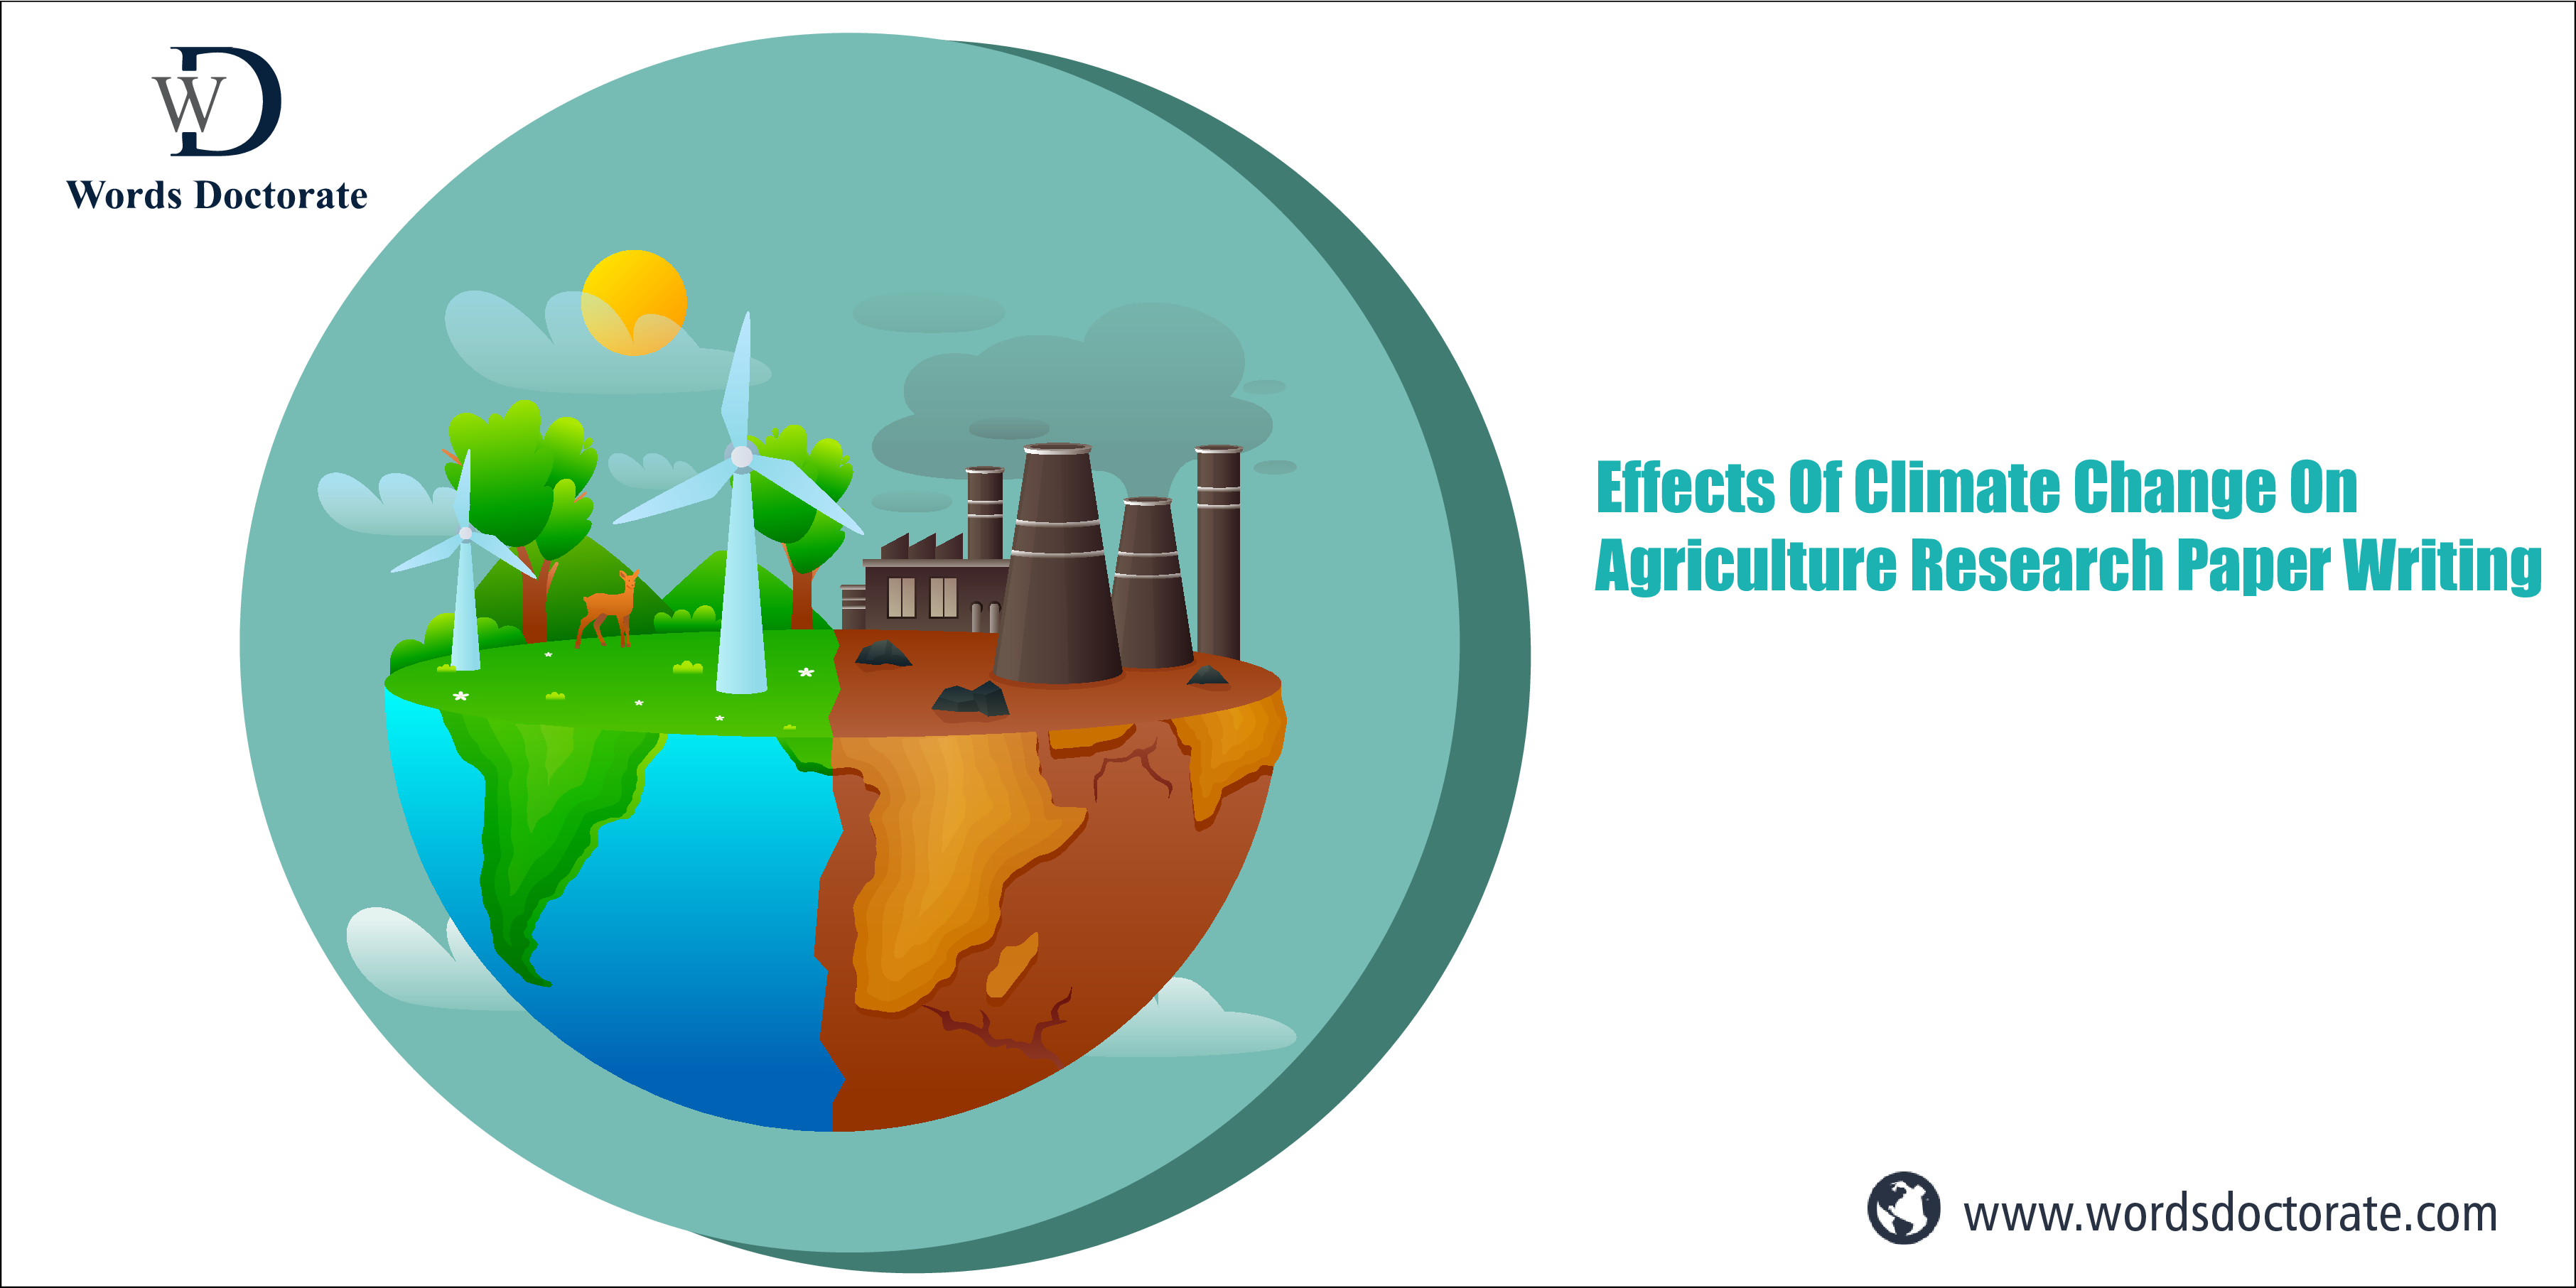 Effects Of Climate Change On Agriculture Research Paper Writing